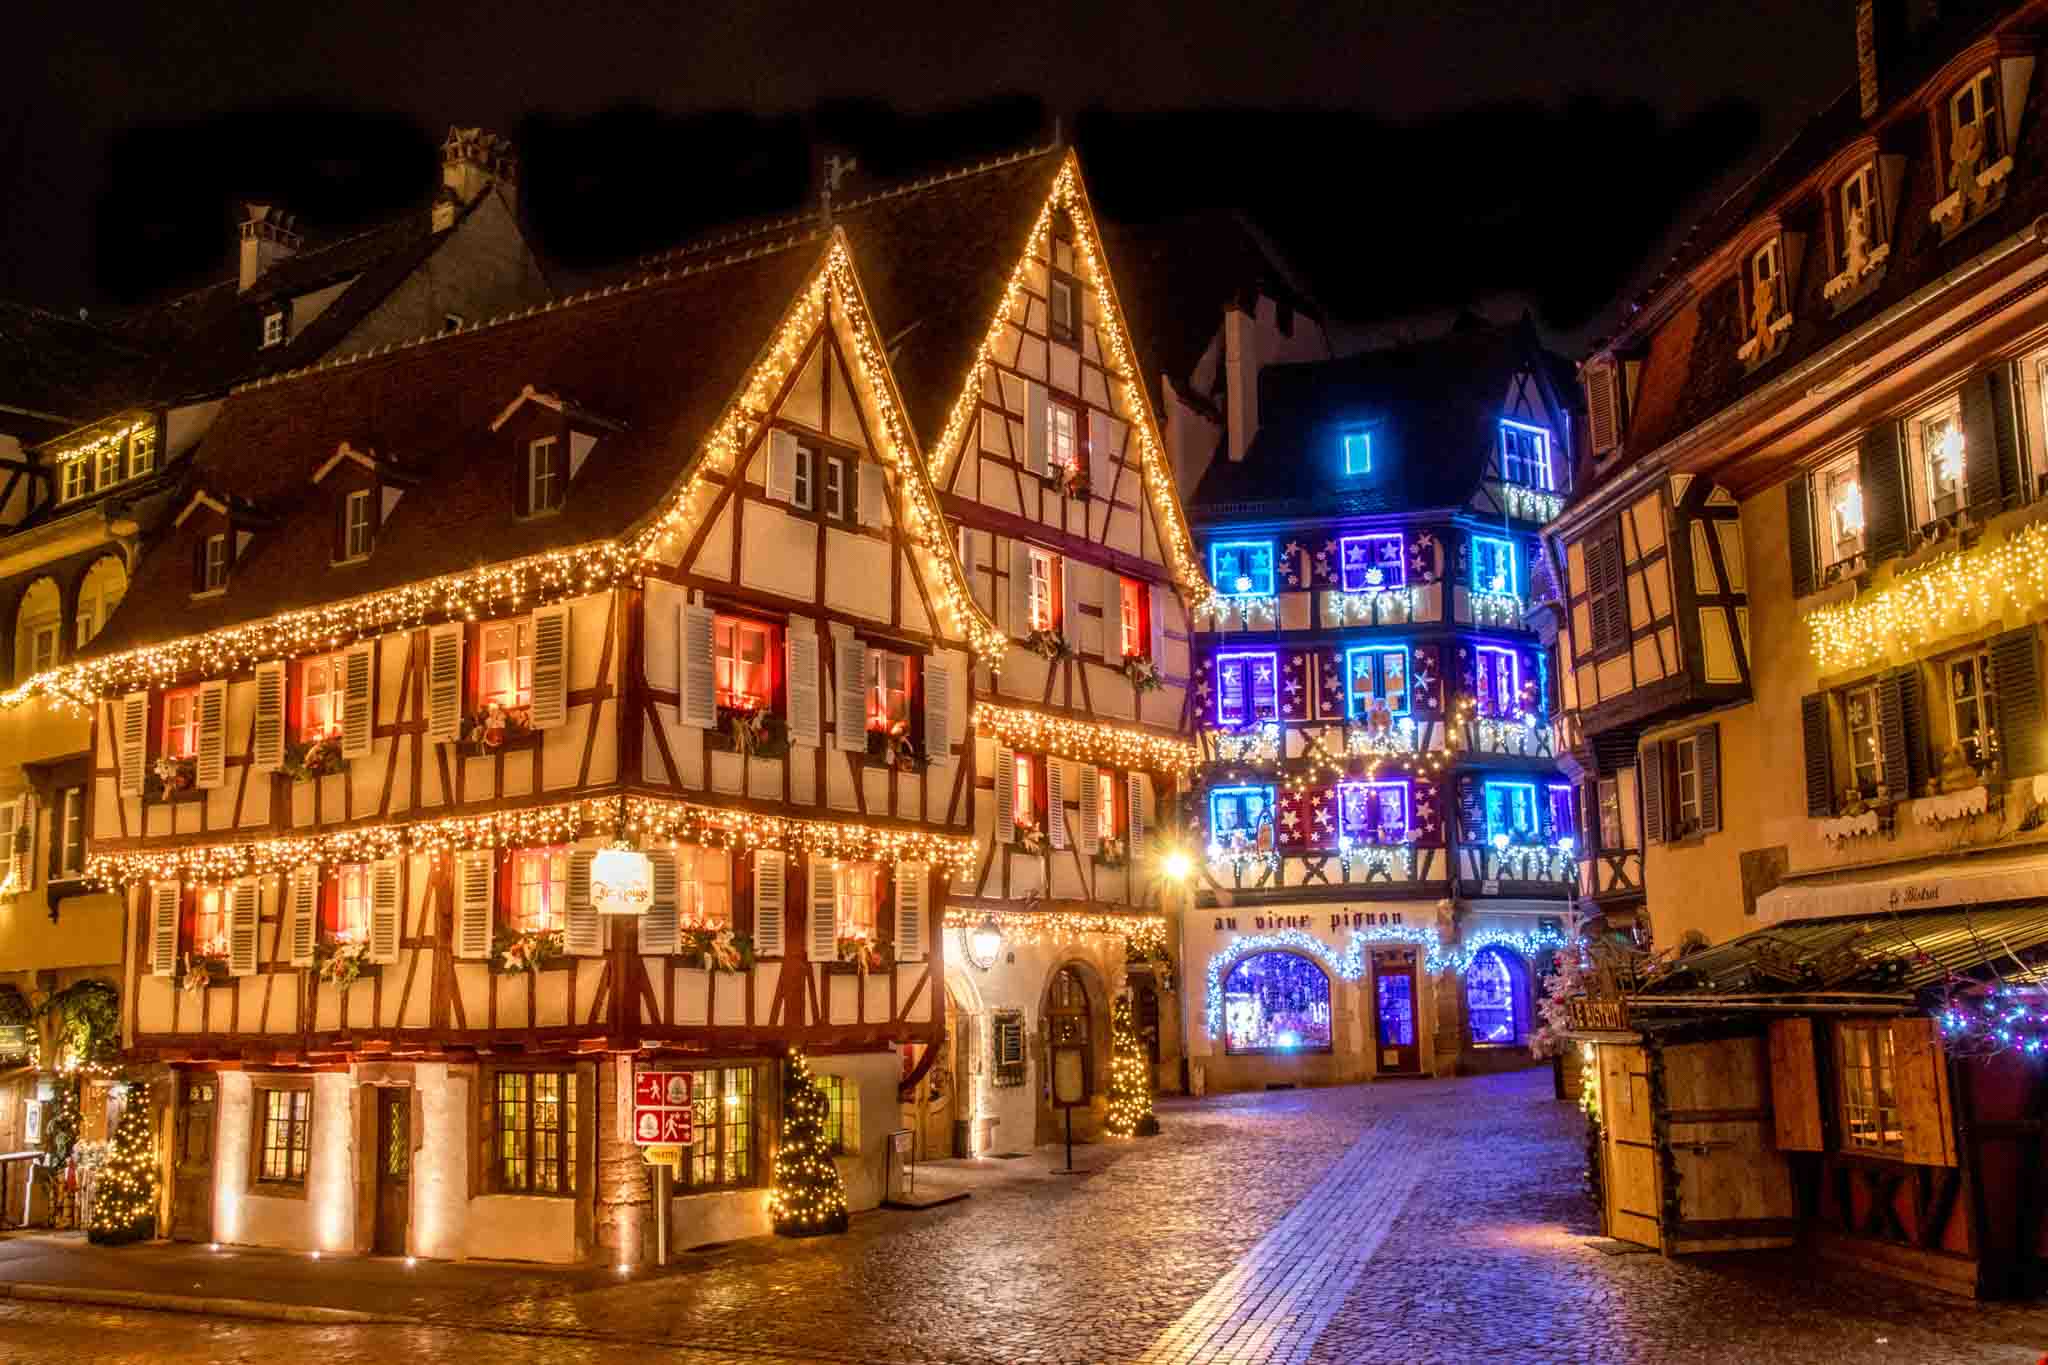 Half-timbered buildings lit up for Christmas.